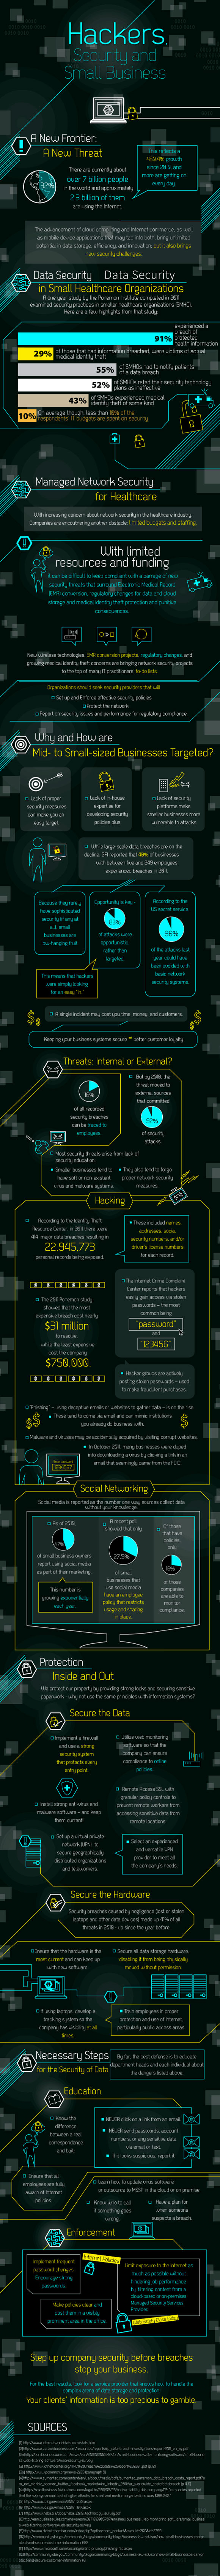 Infographic about hackers